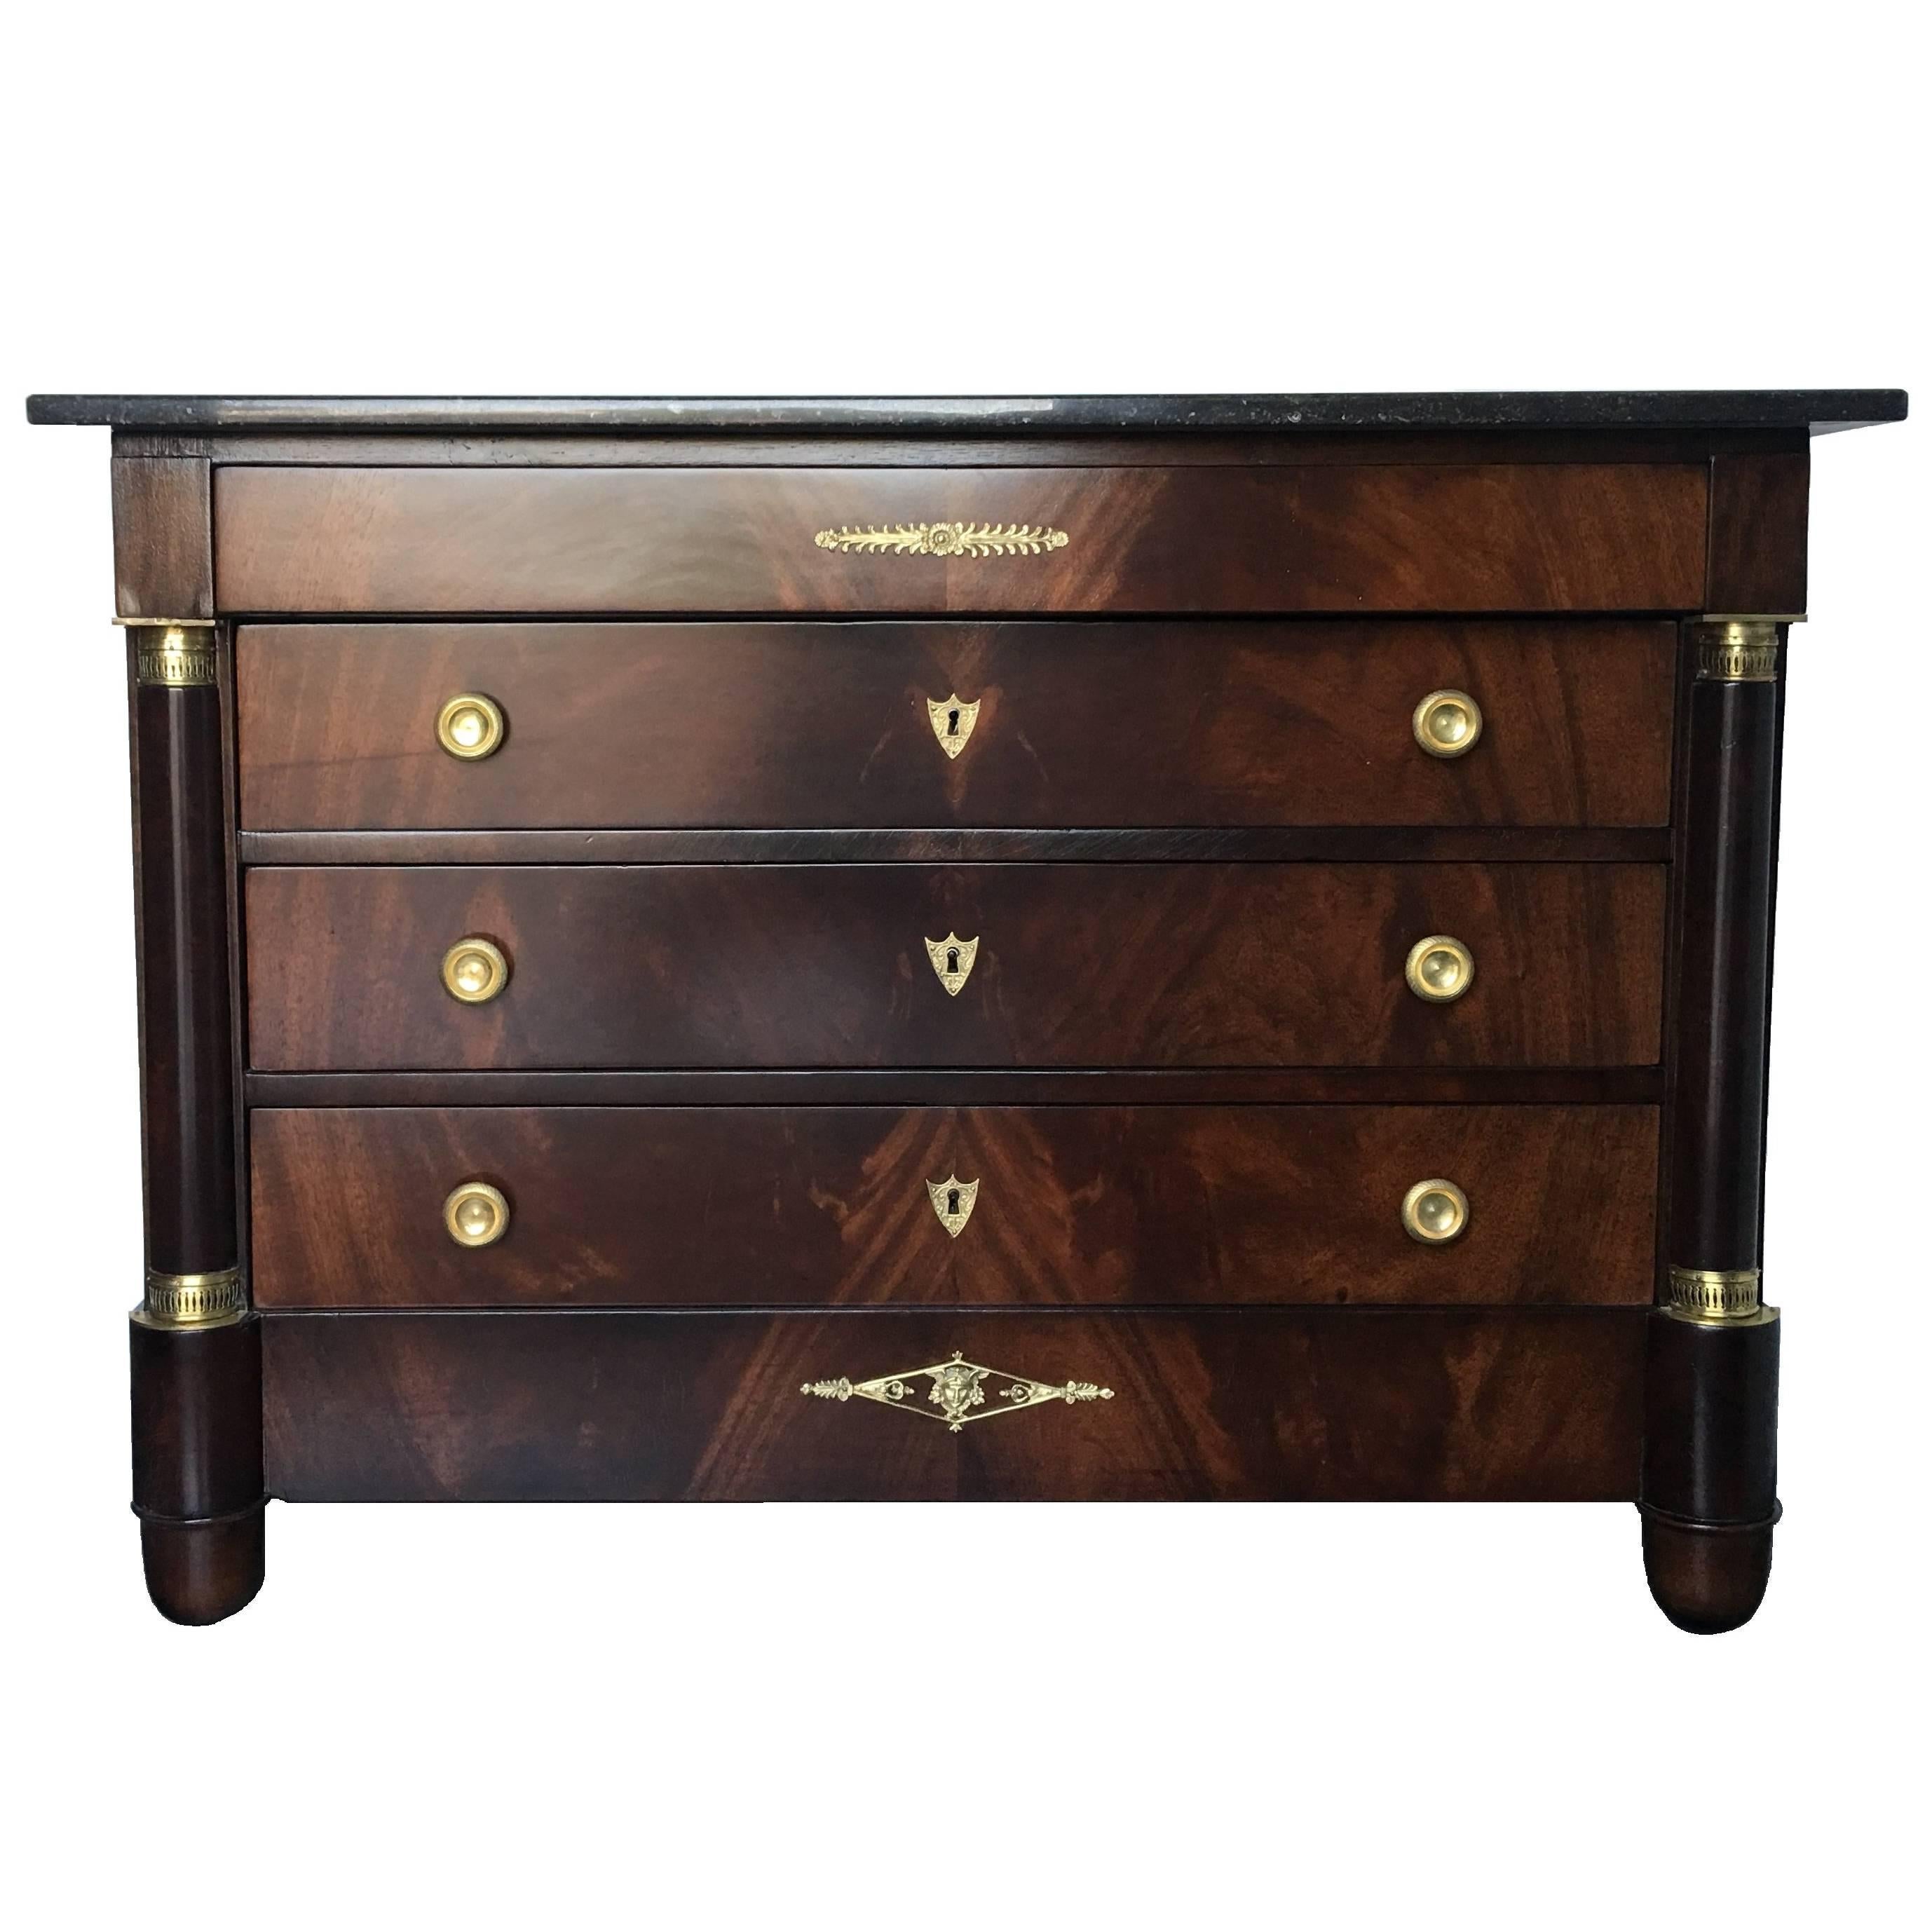 19th Century French Empire Directoire-Style Commode For Sale